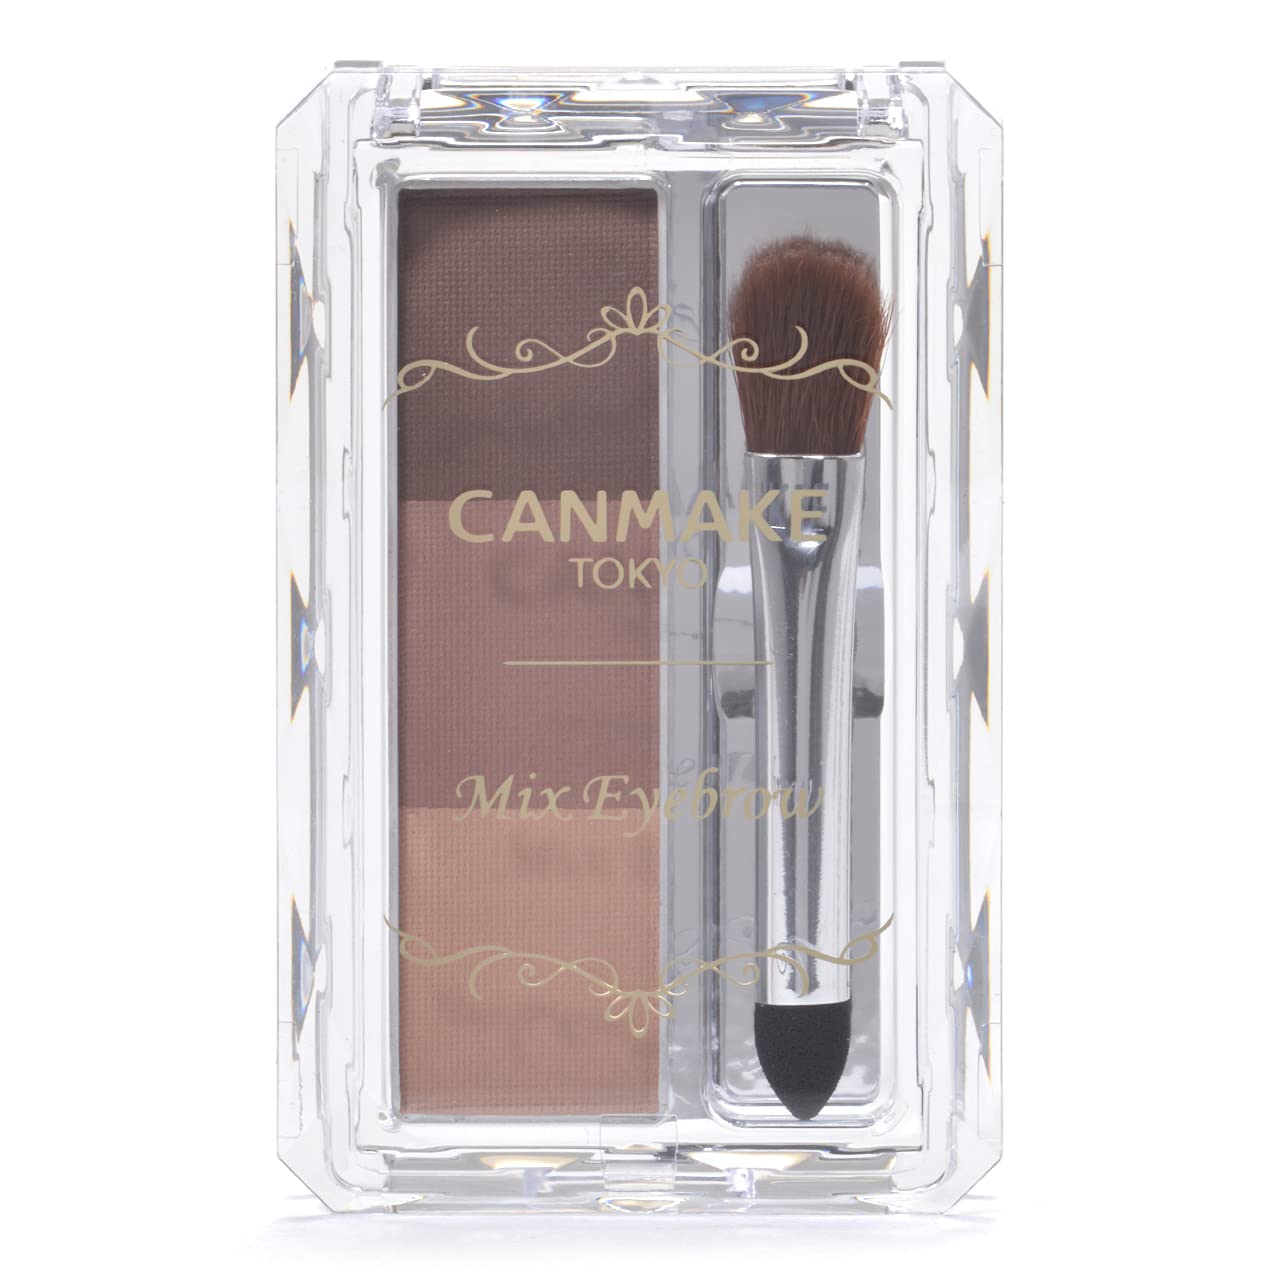 CANMAKE Mix Eyebrow, 07 Misty Mauve Brown